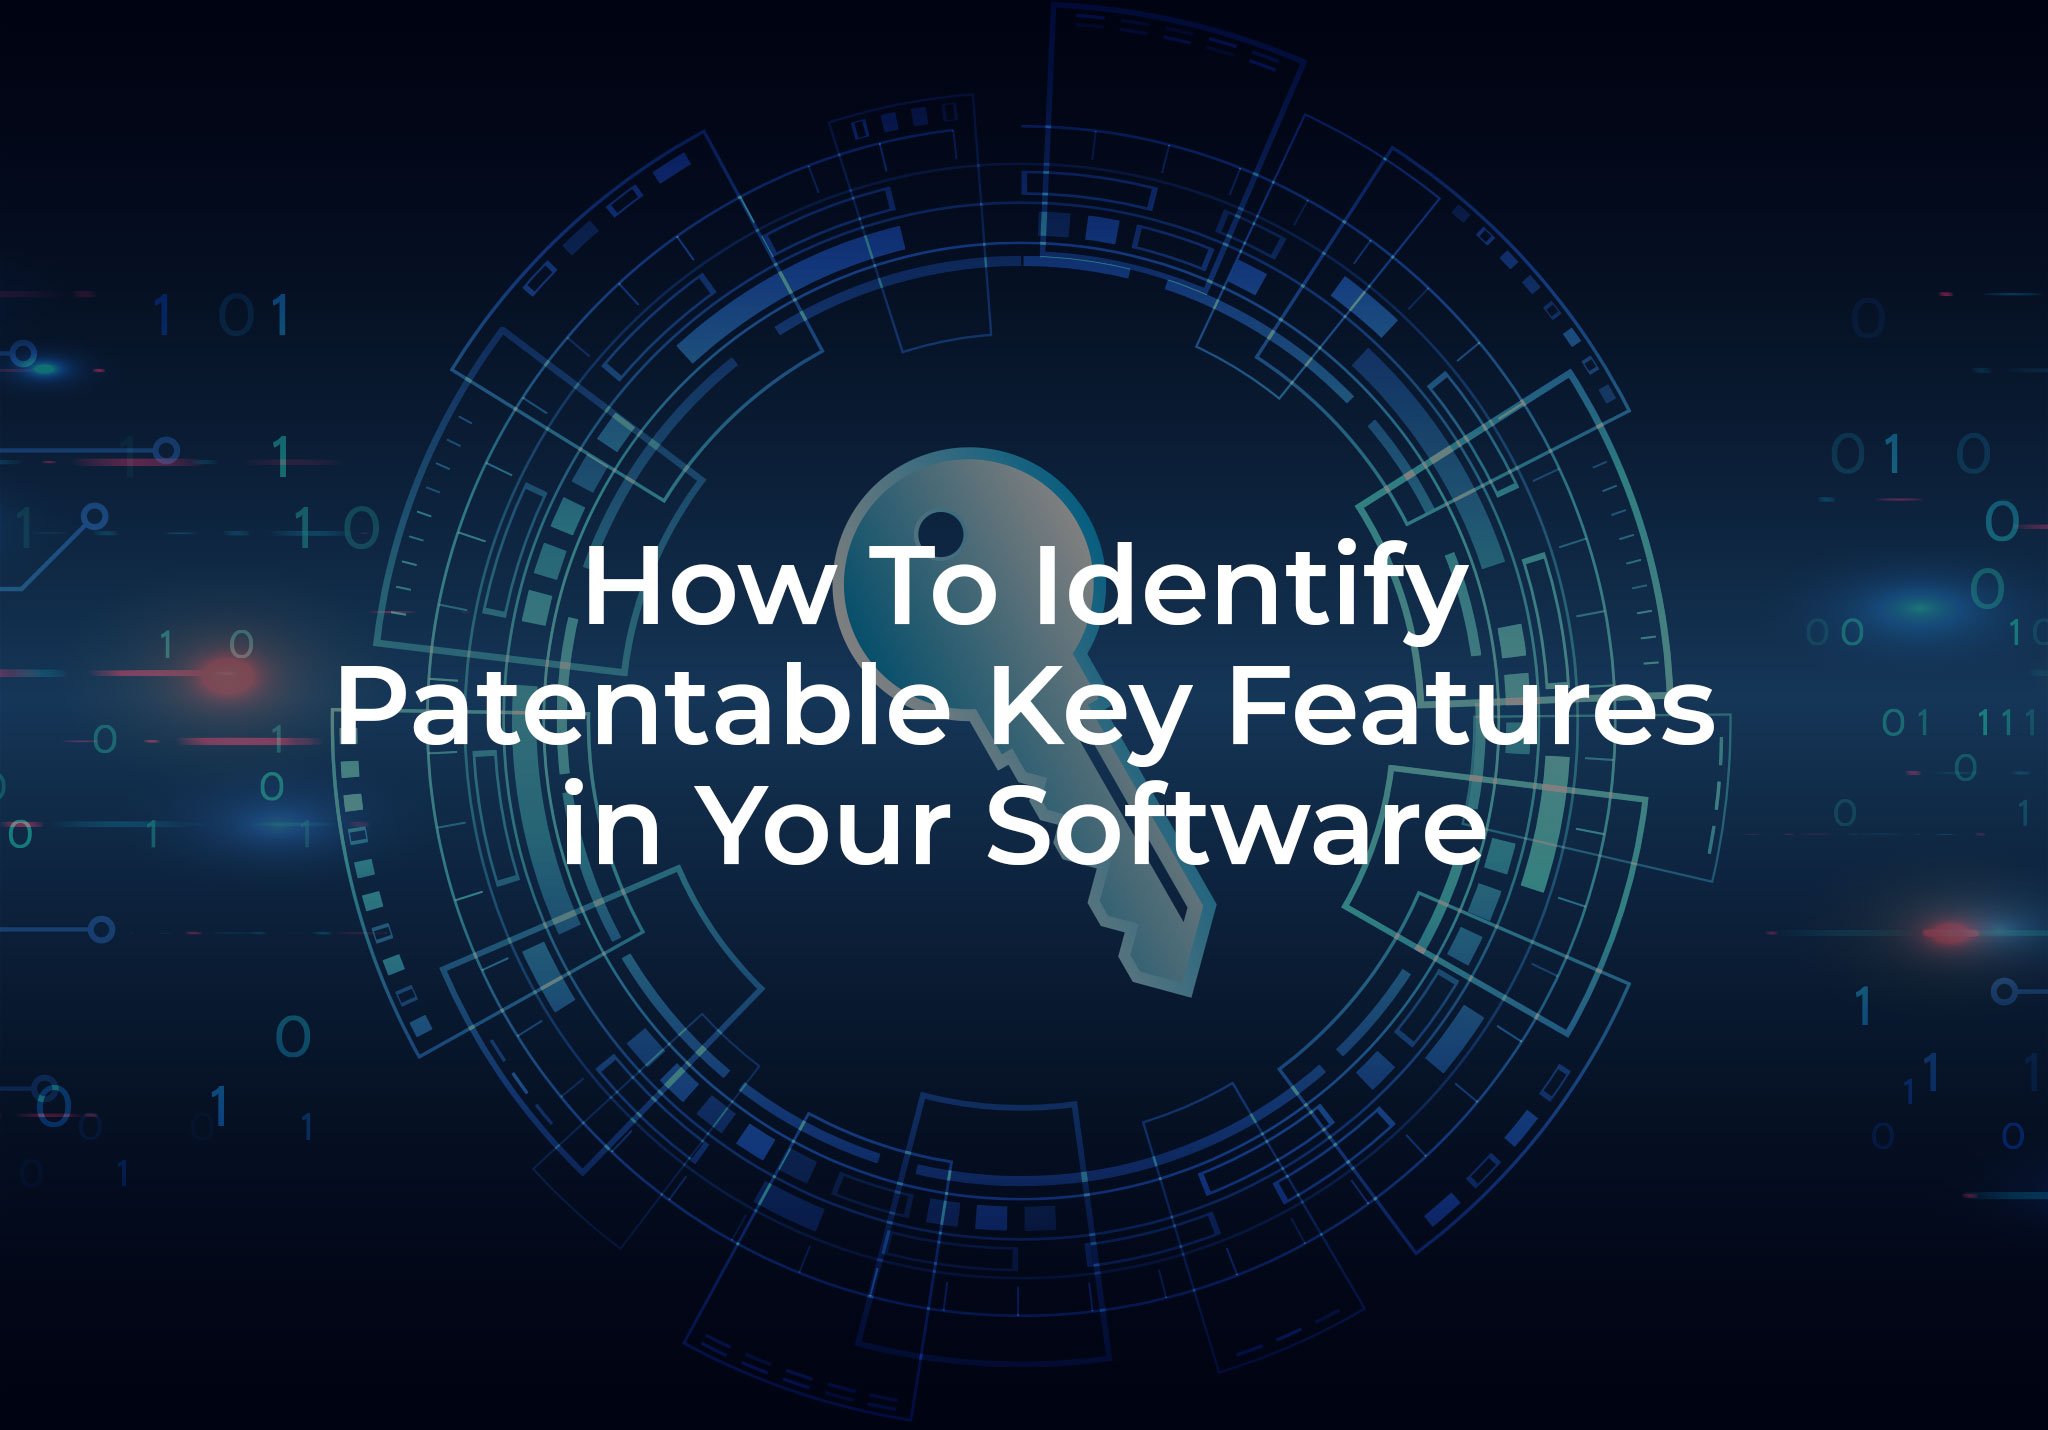 How To Identify Patentable Key Features in Your Software